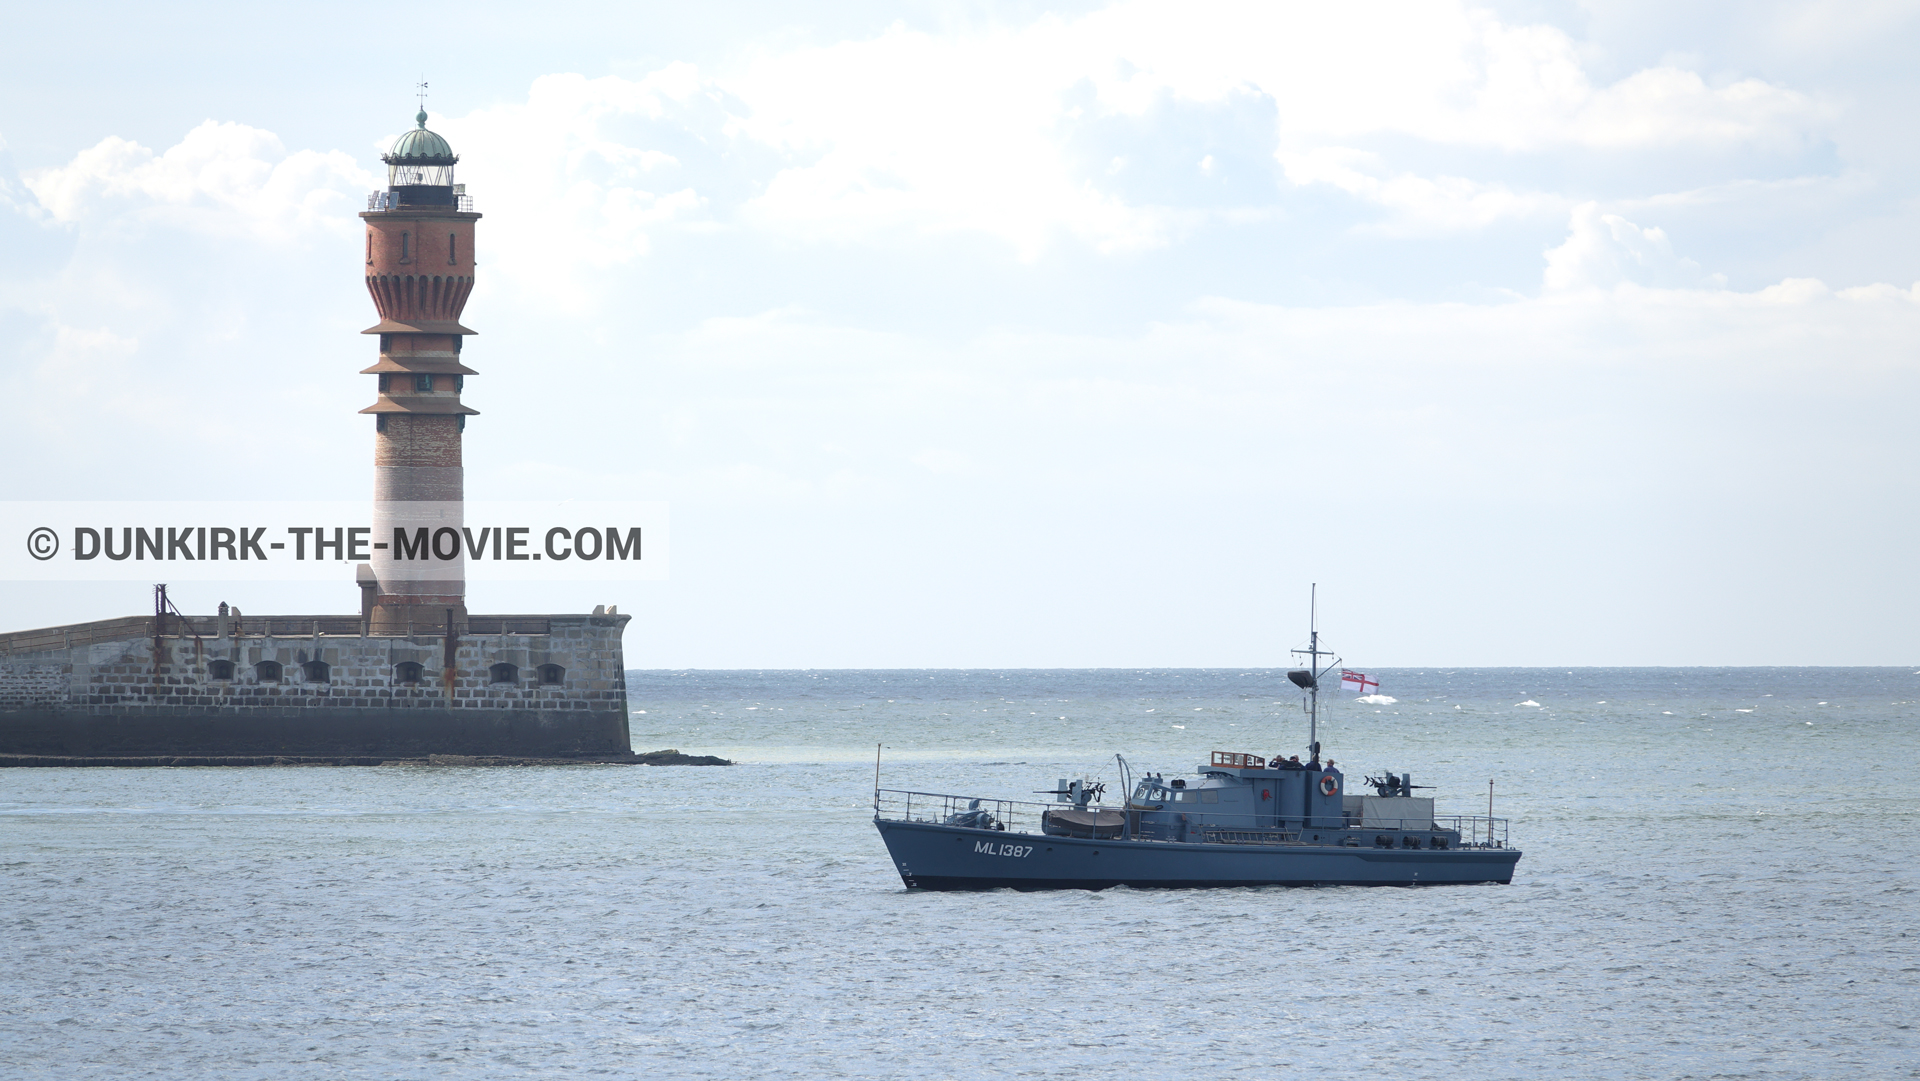 Picture with HMS Medusa - ML1387, St Pol sur Mer lighthouse,  from behind the scene of the Dunkirk movie by Nolan